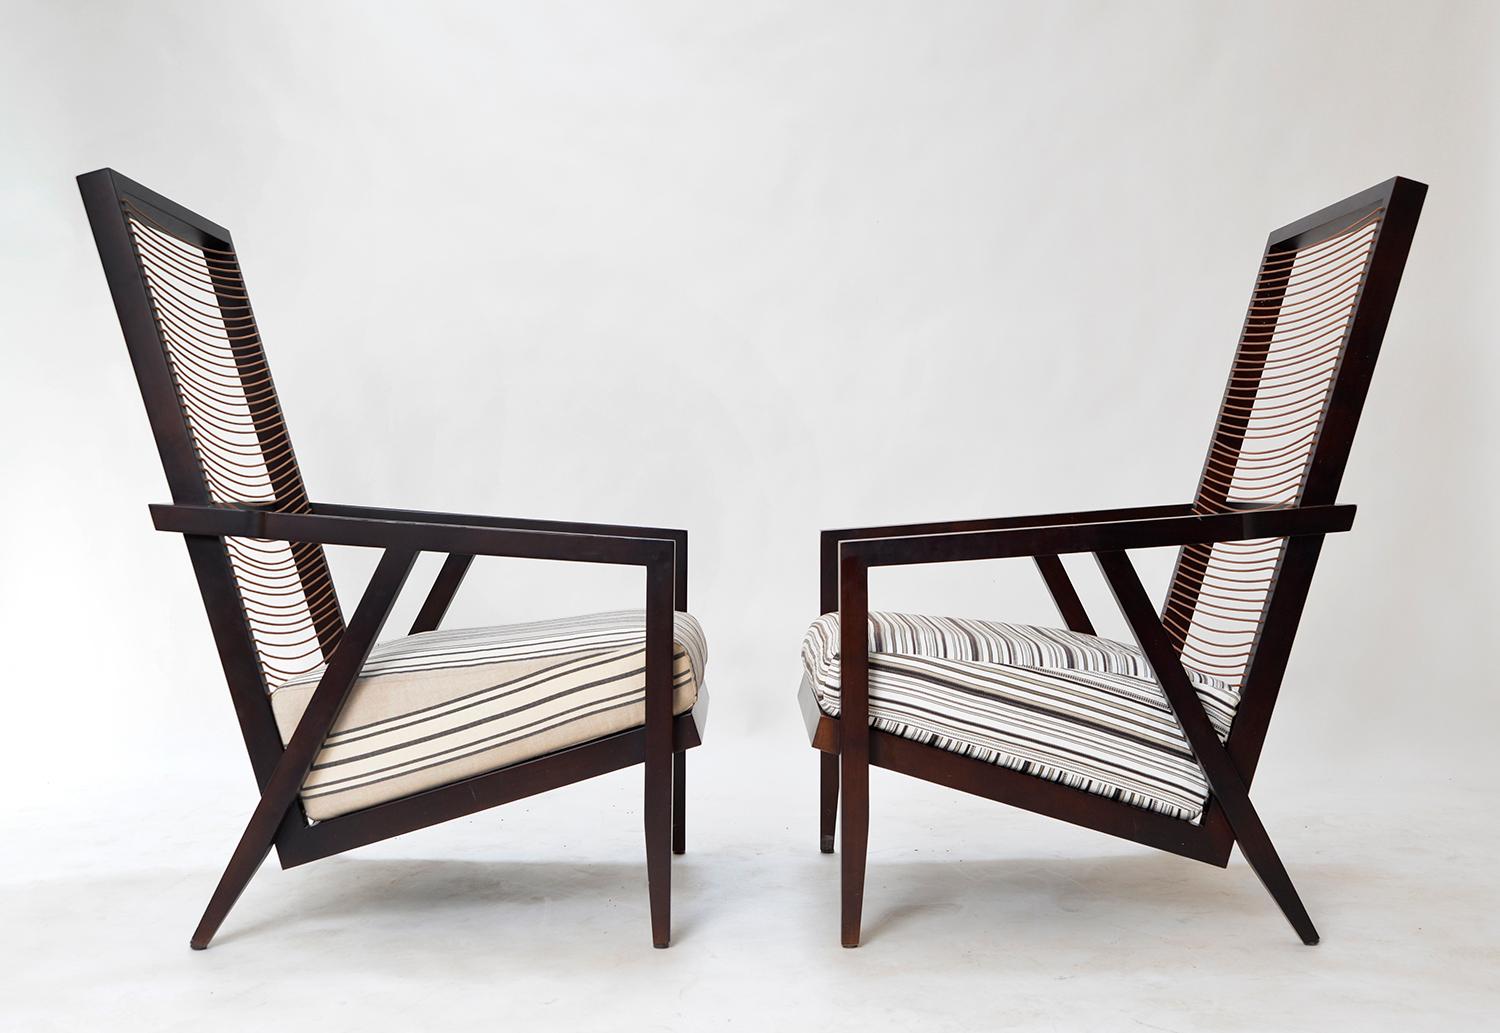 Two Astoria high back lounge chairs designed by Franco Bizzozzero and manufactured by Pierantonio Bonacina, one retaining the maker’s label.
The angular design is made from stained wood, the colour a dark reddish brown – almost black. The strung